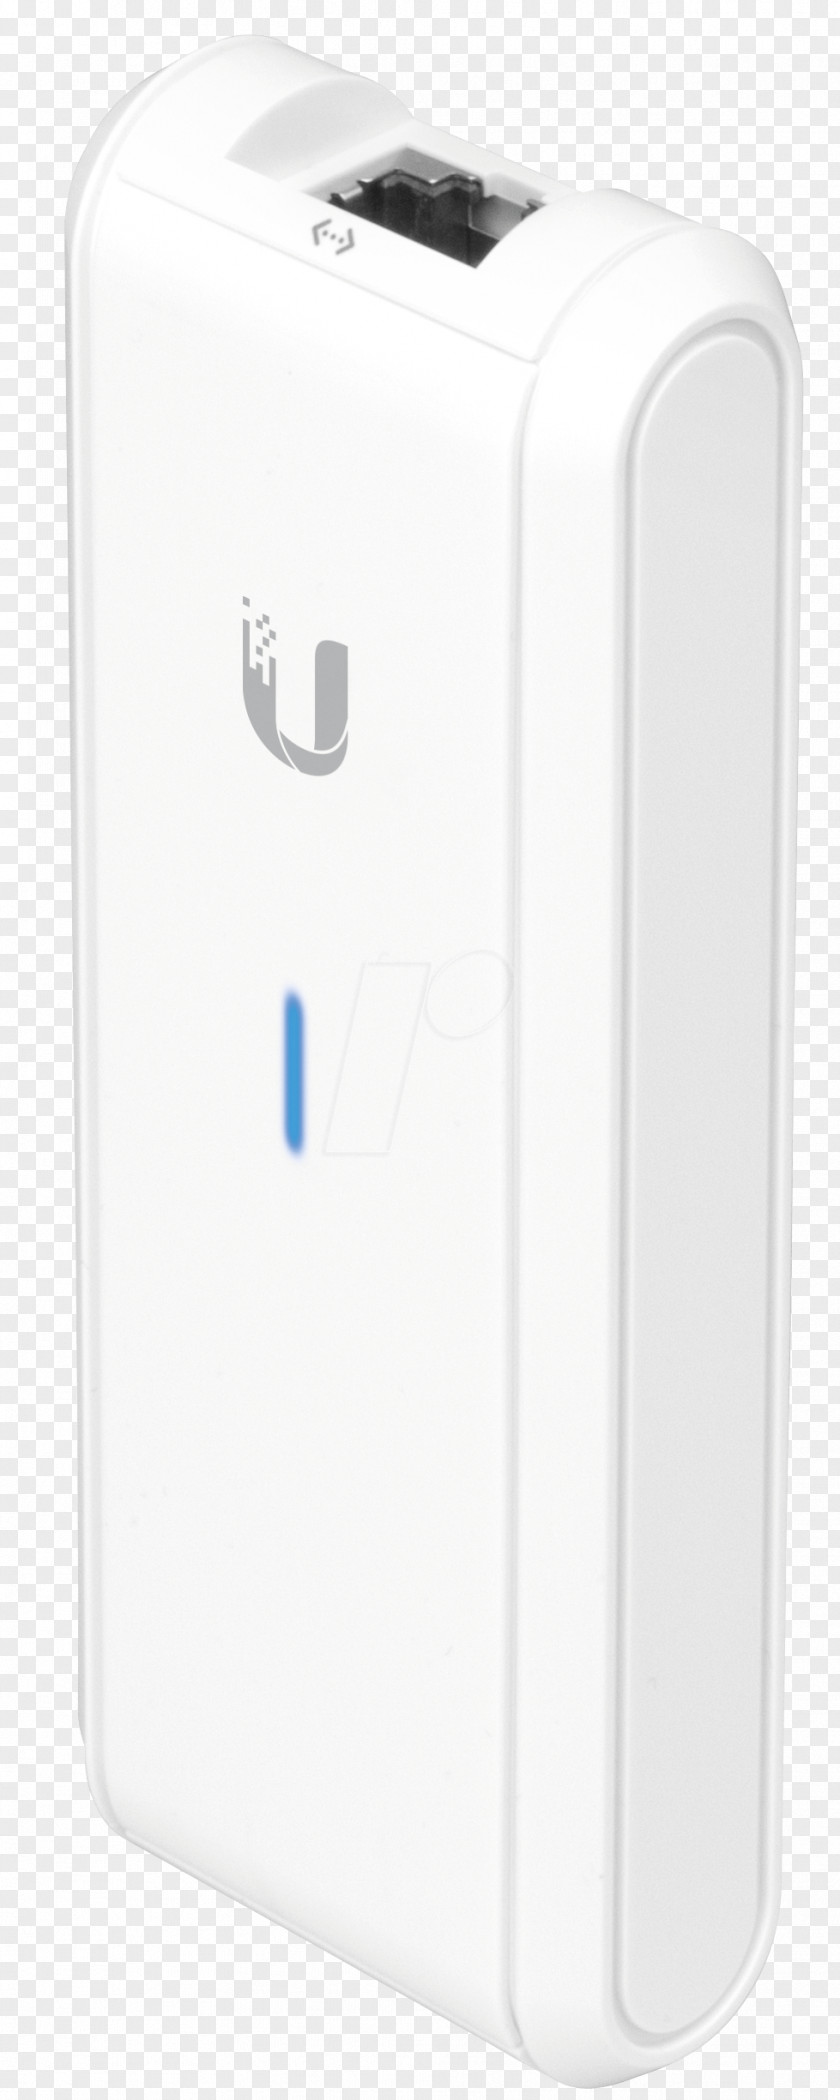 Cloud Computing Ubiquiti Networks Wireless Access Points Computer Network Unifi PNG